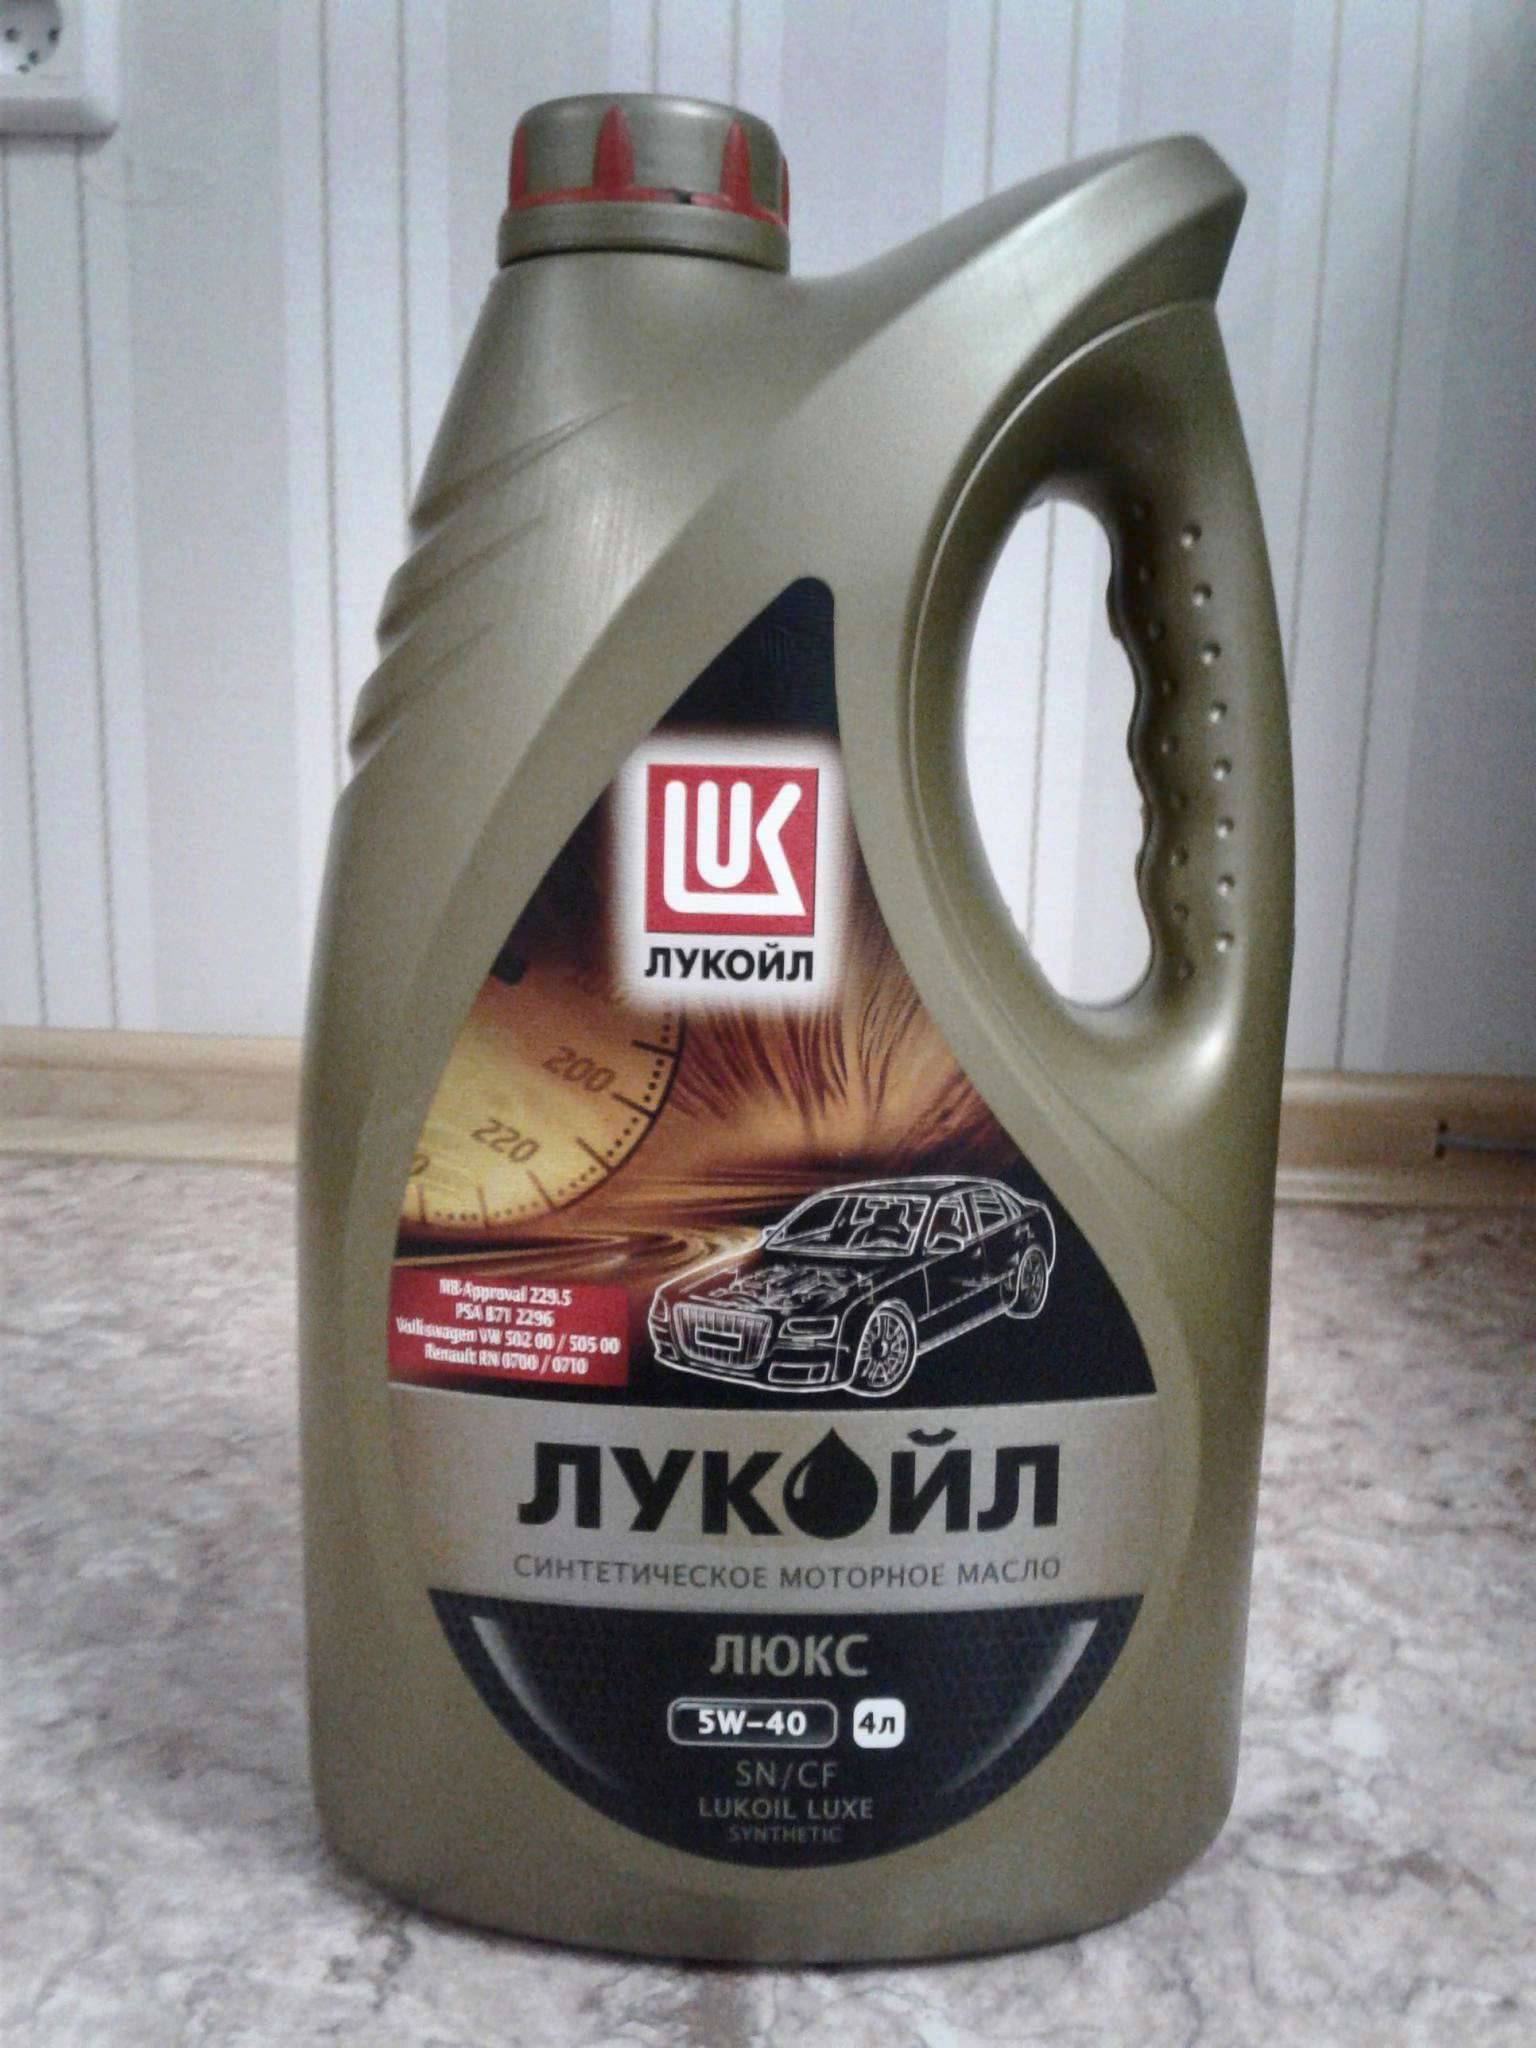 Масло моторное лукойл cf 4. Lukoil Luxe 5w-40. Лукойл Люкс 5w40 SN/CF. Лукойл Люкс 5w40 SN/CF 4л. SN/CF 5w-40 Lukoil.